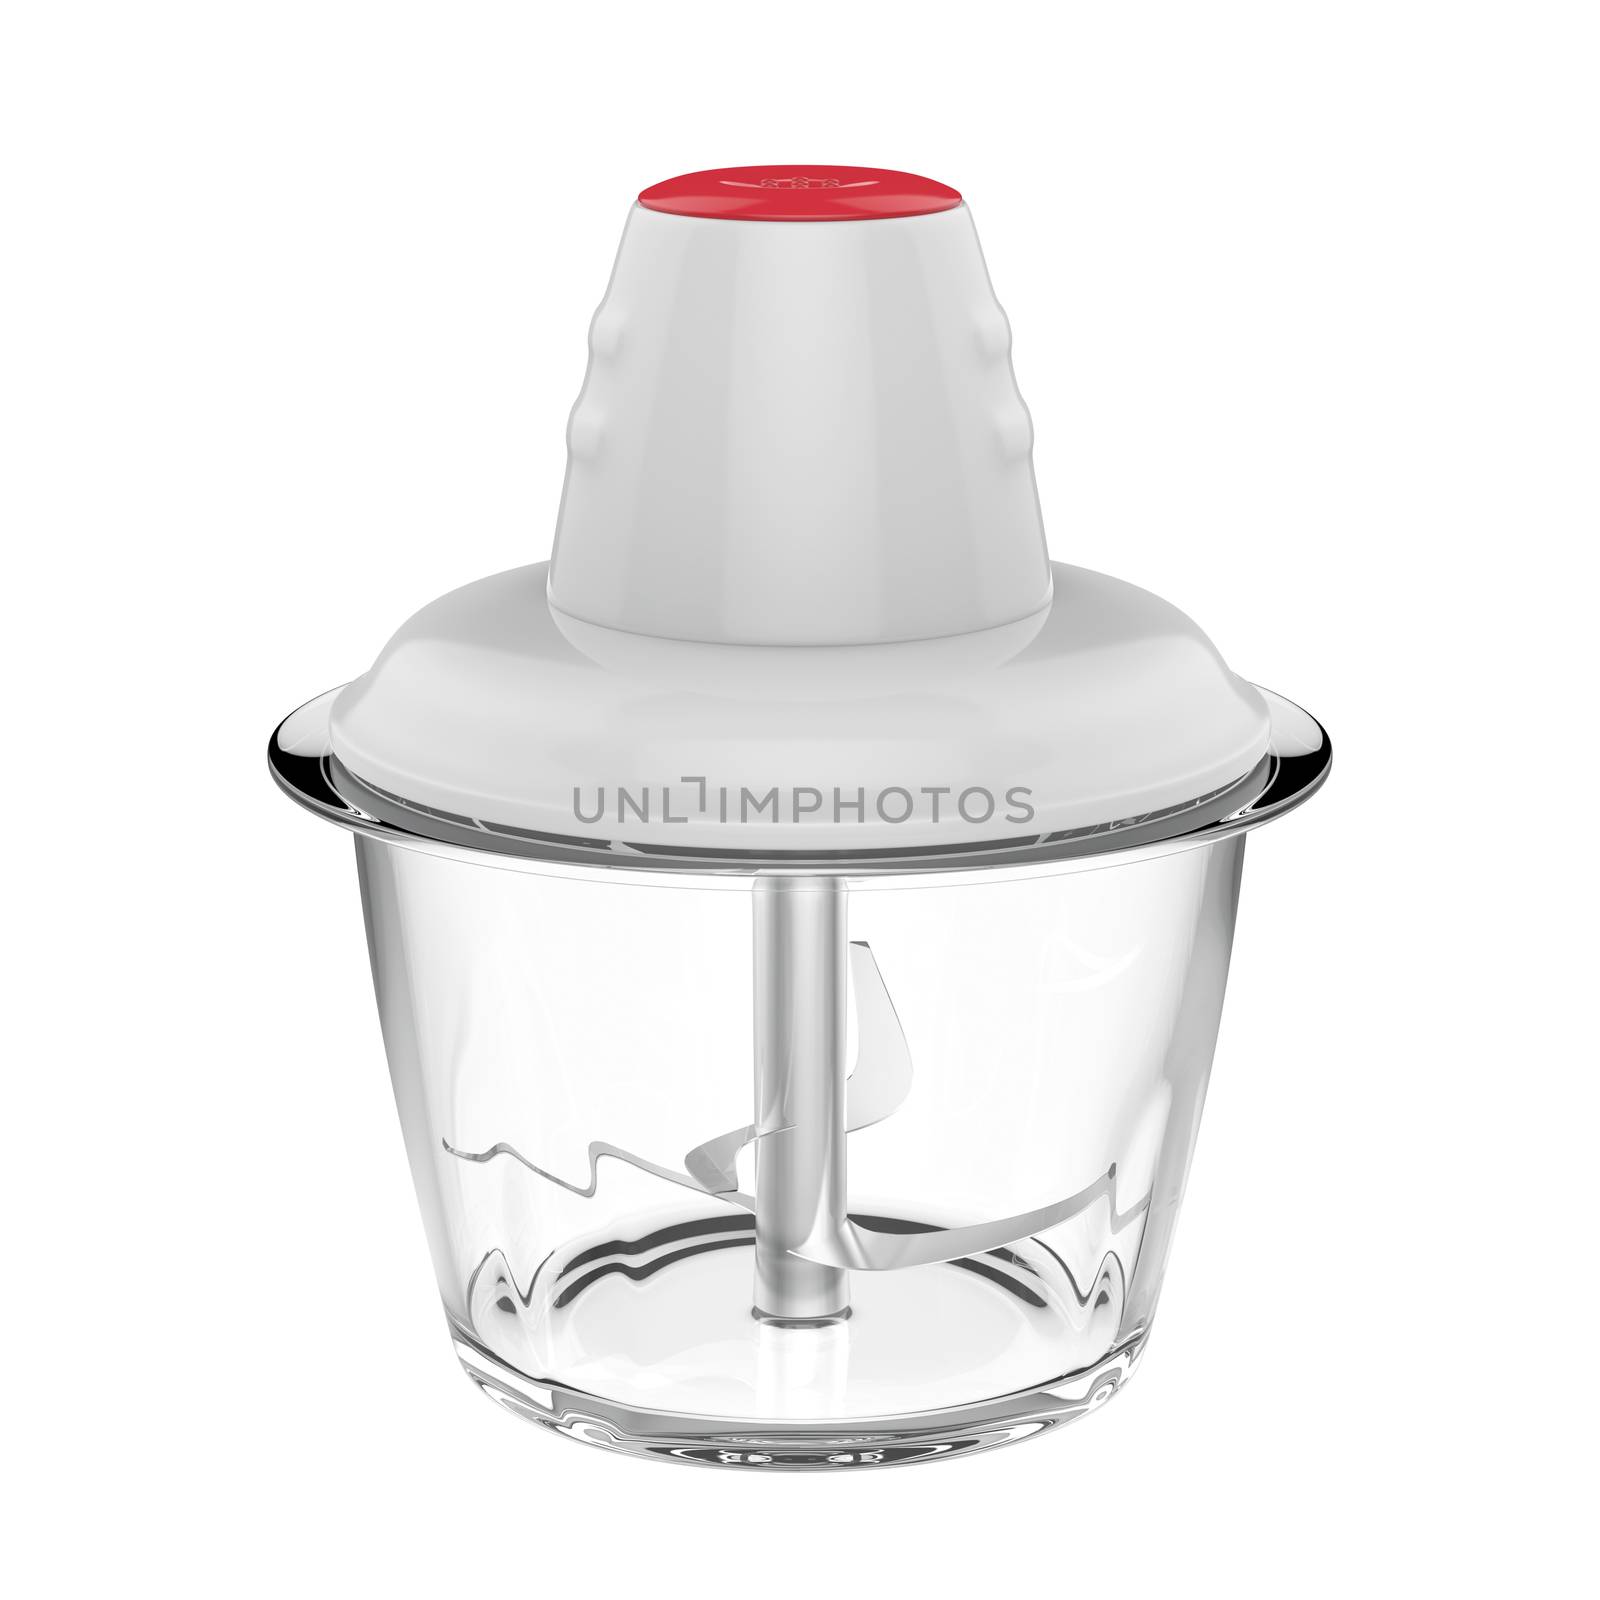 Food processor by magraphics